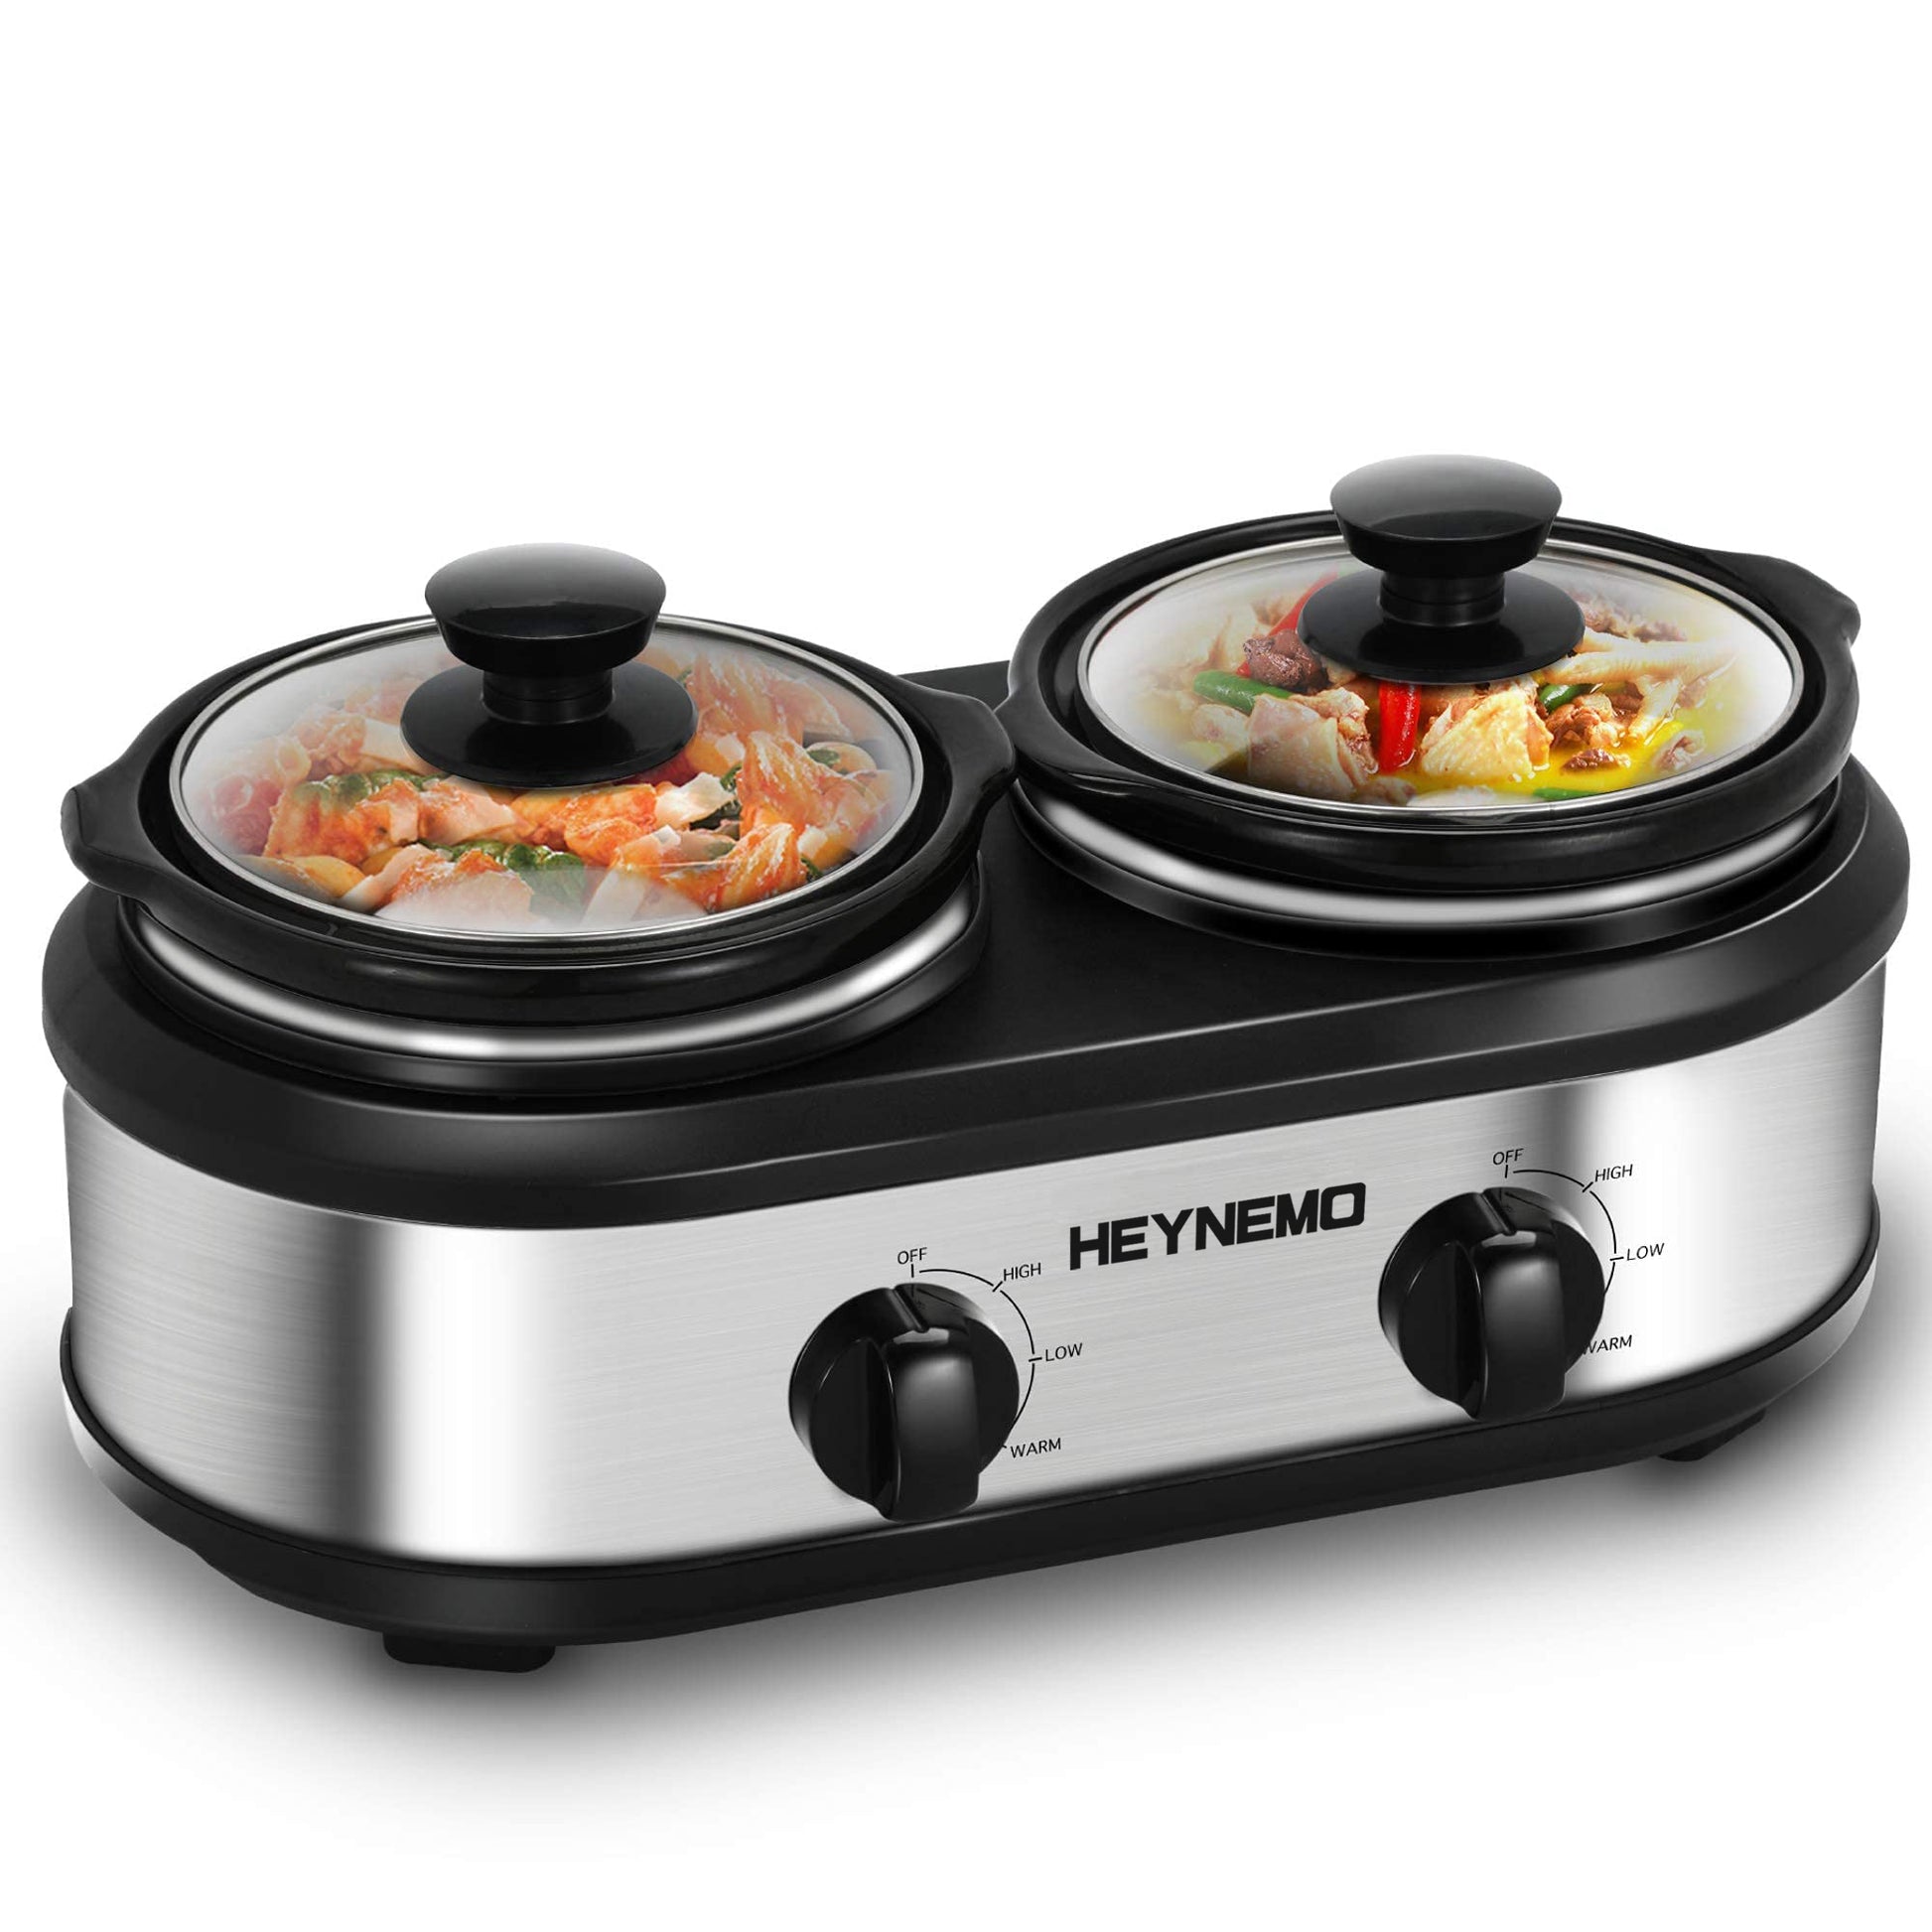 Double the fun with our new double-dish slow cooker